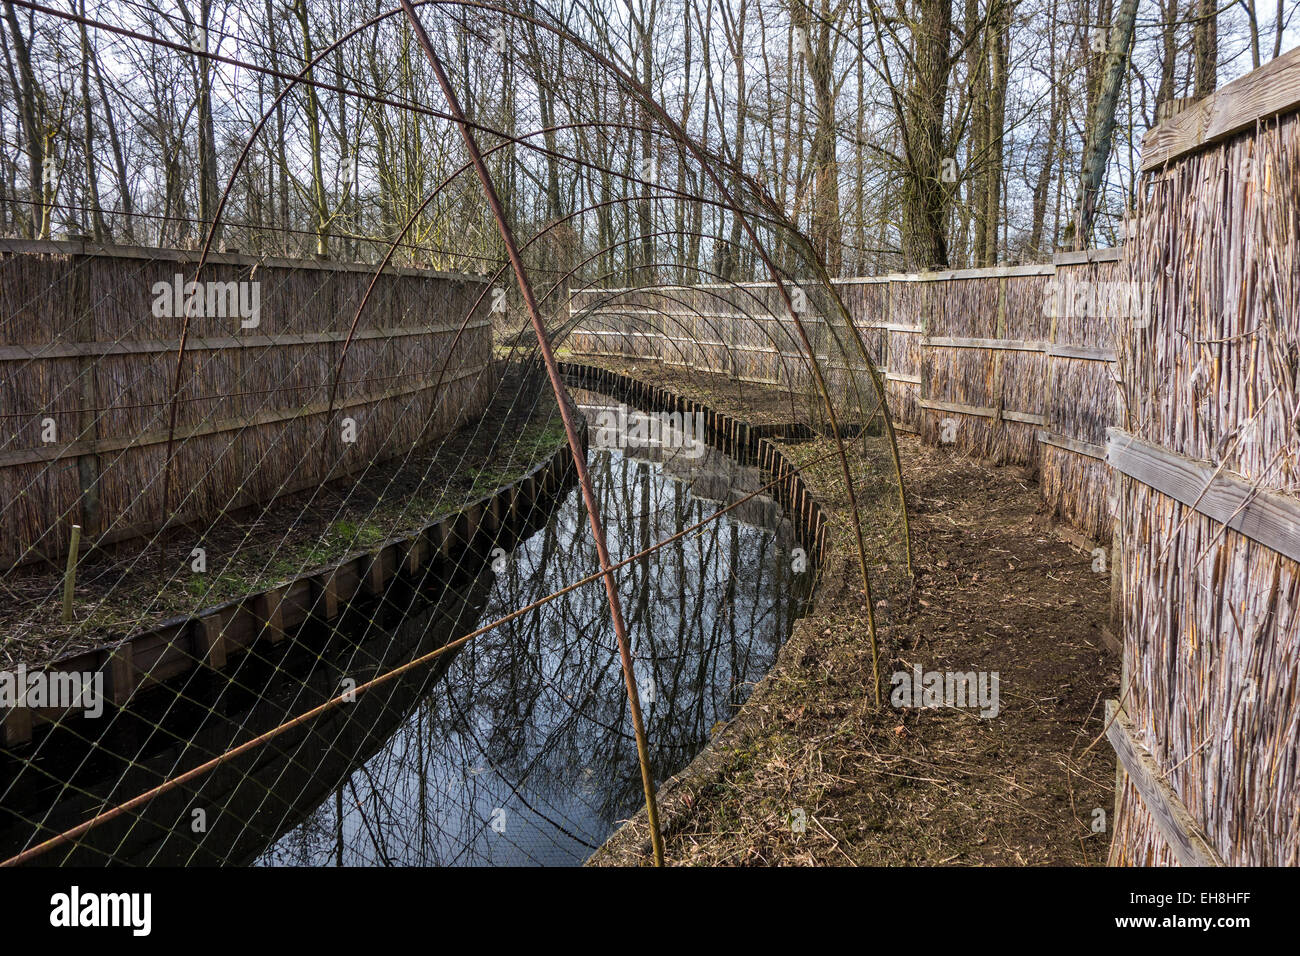 Duck decoy structure used for catching wild ducks showing pipe formed by hoops with netting flanked by screens Stock Photo